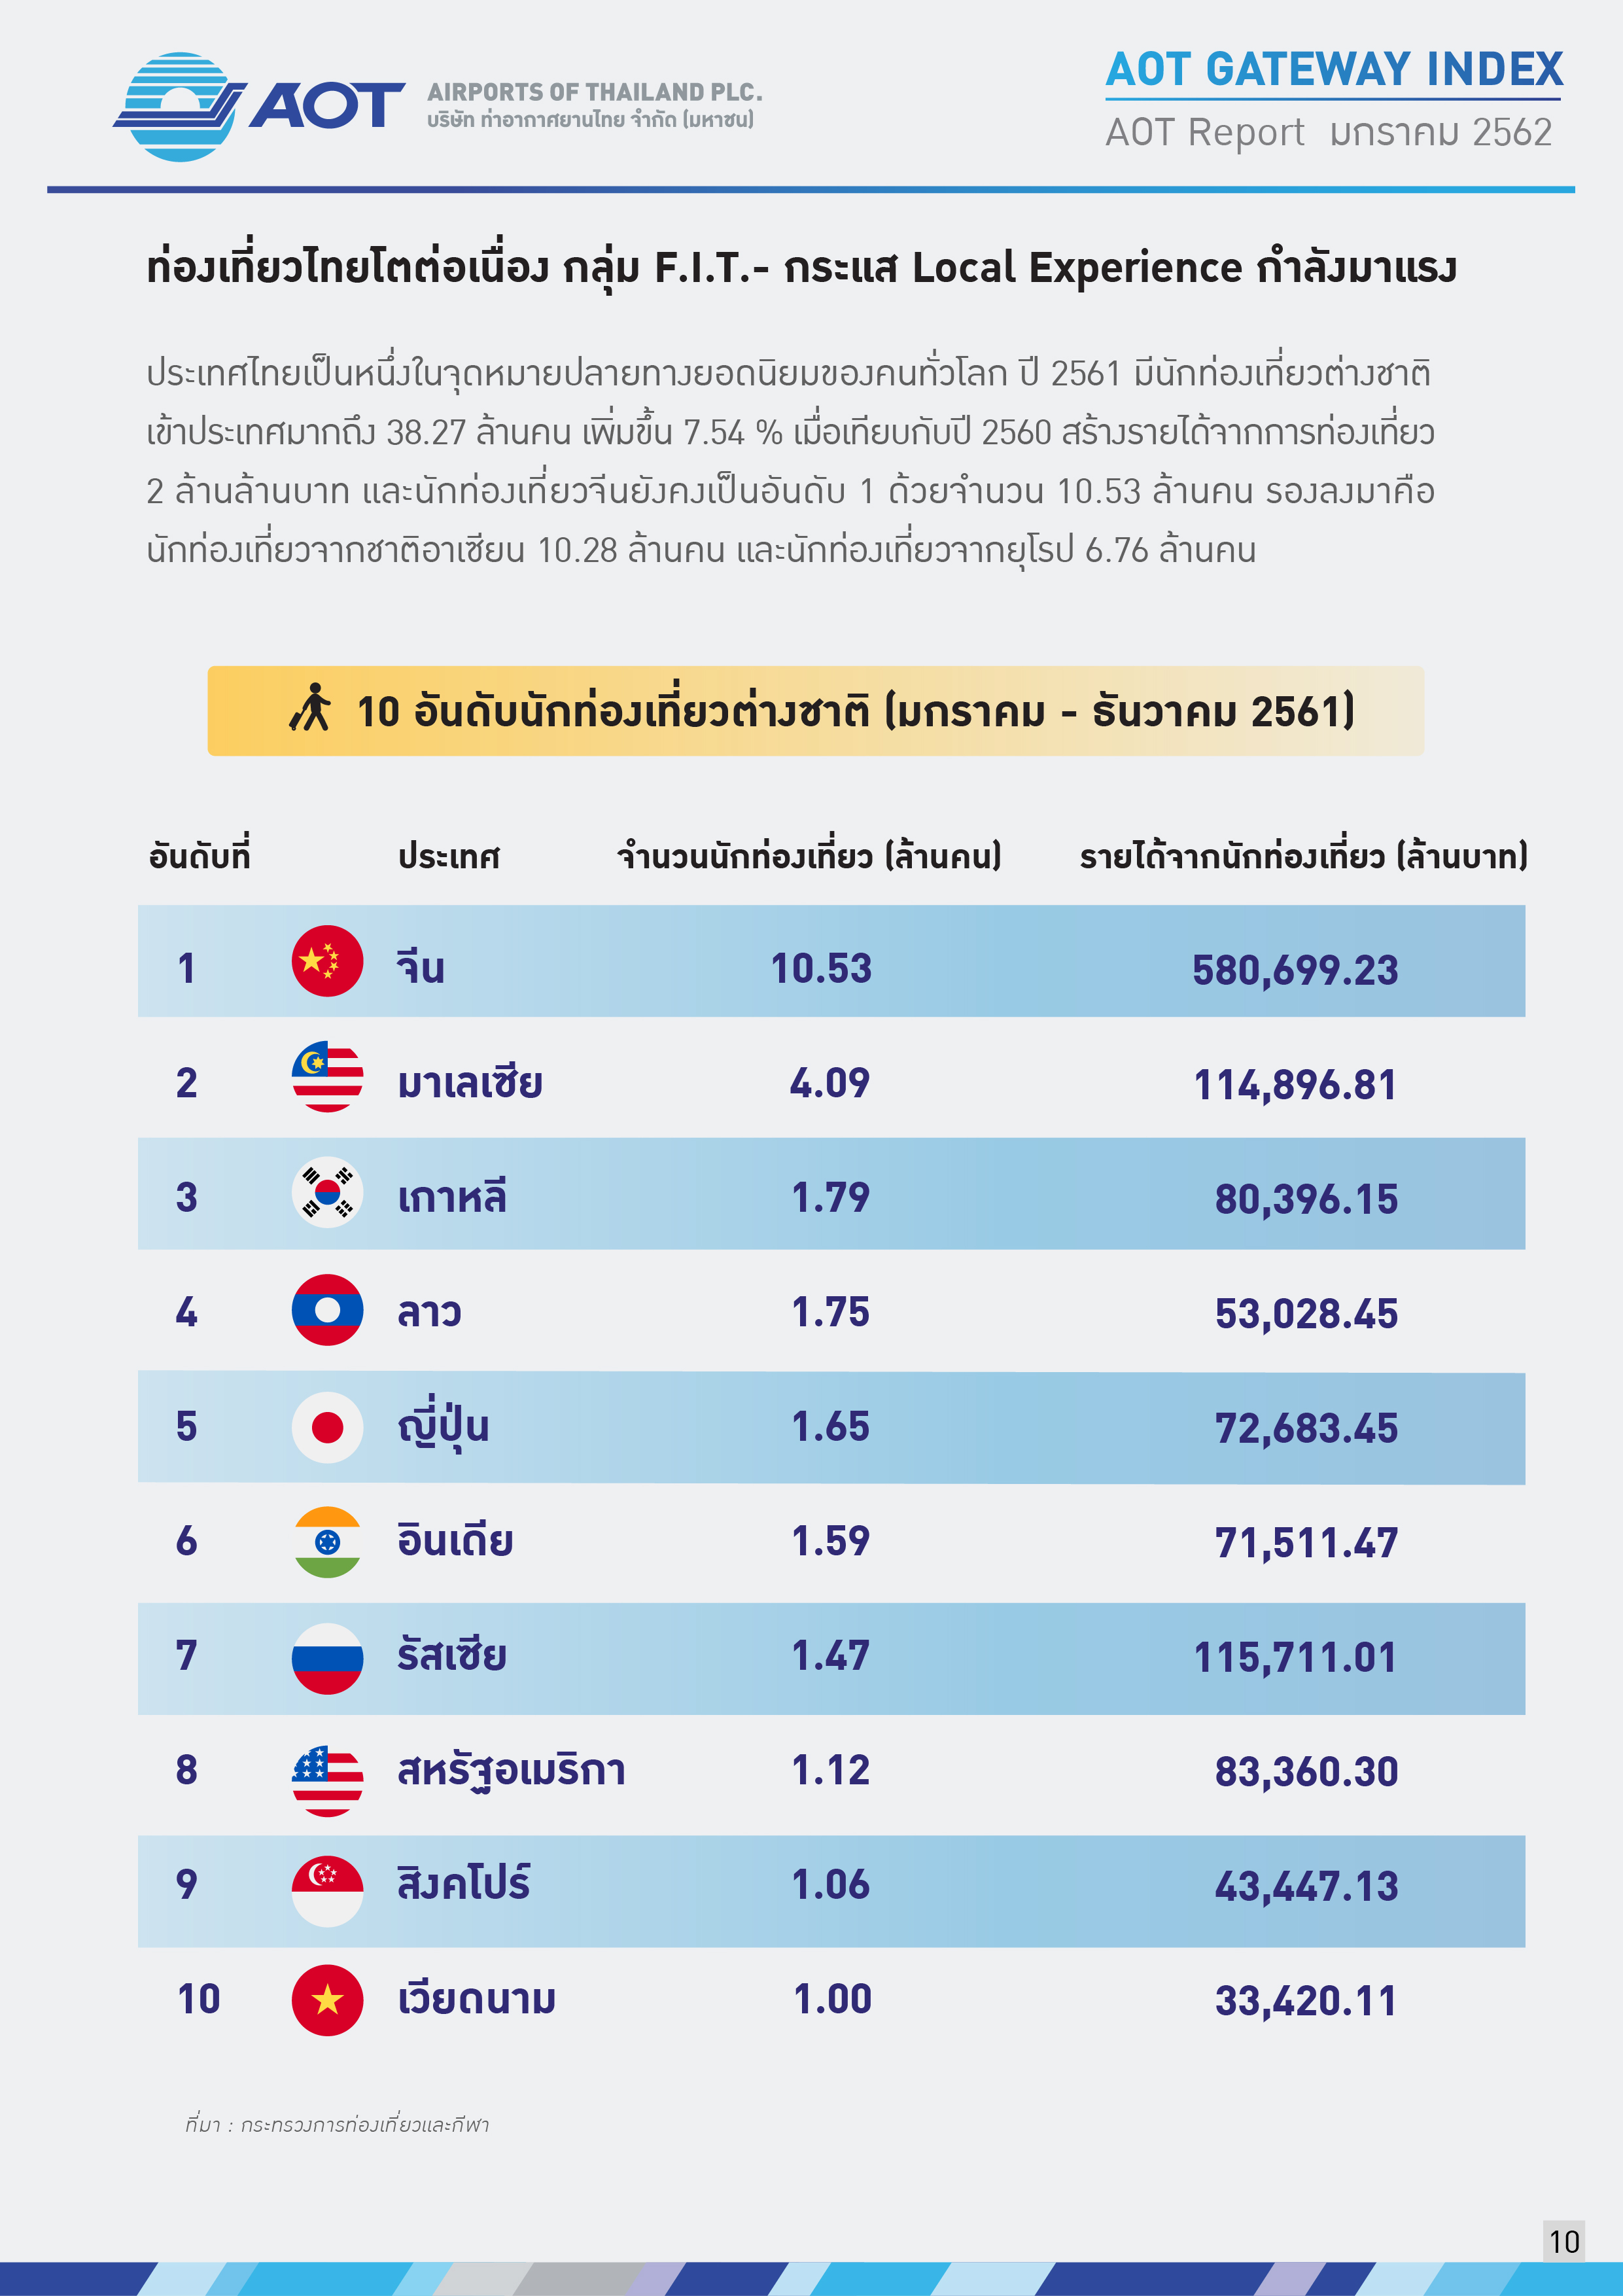 AOTcontent2019_Index_02_เศรษฐกิจโลก_V5_20190401_Page10